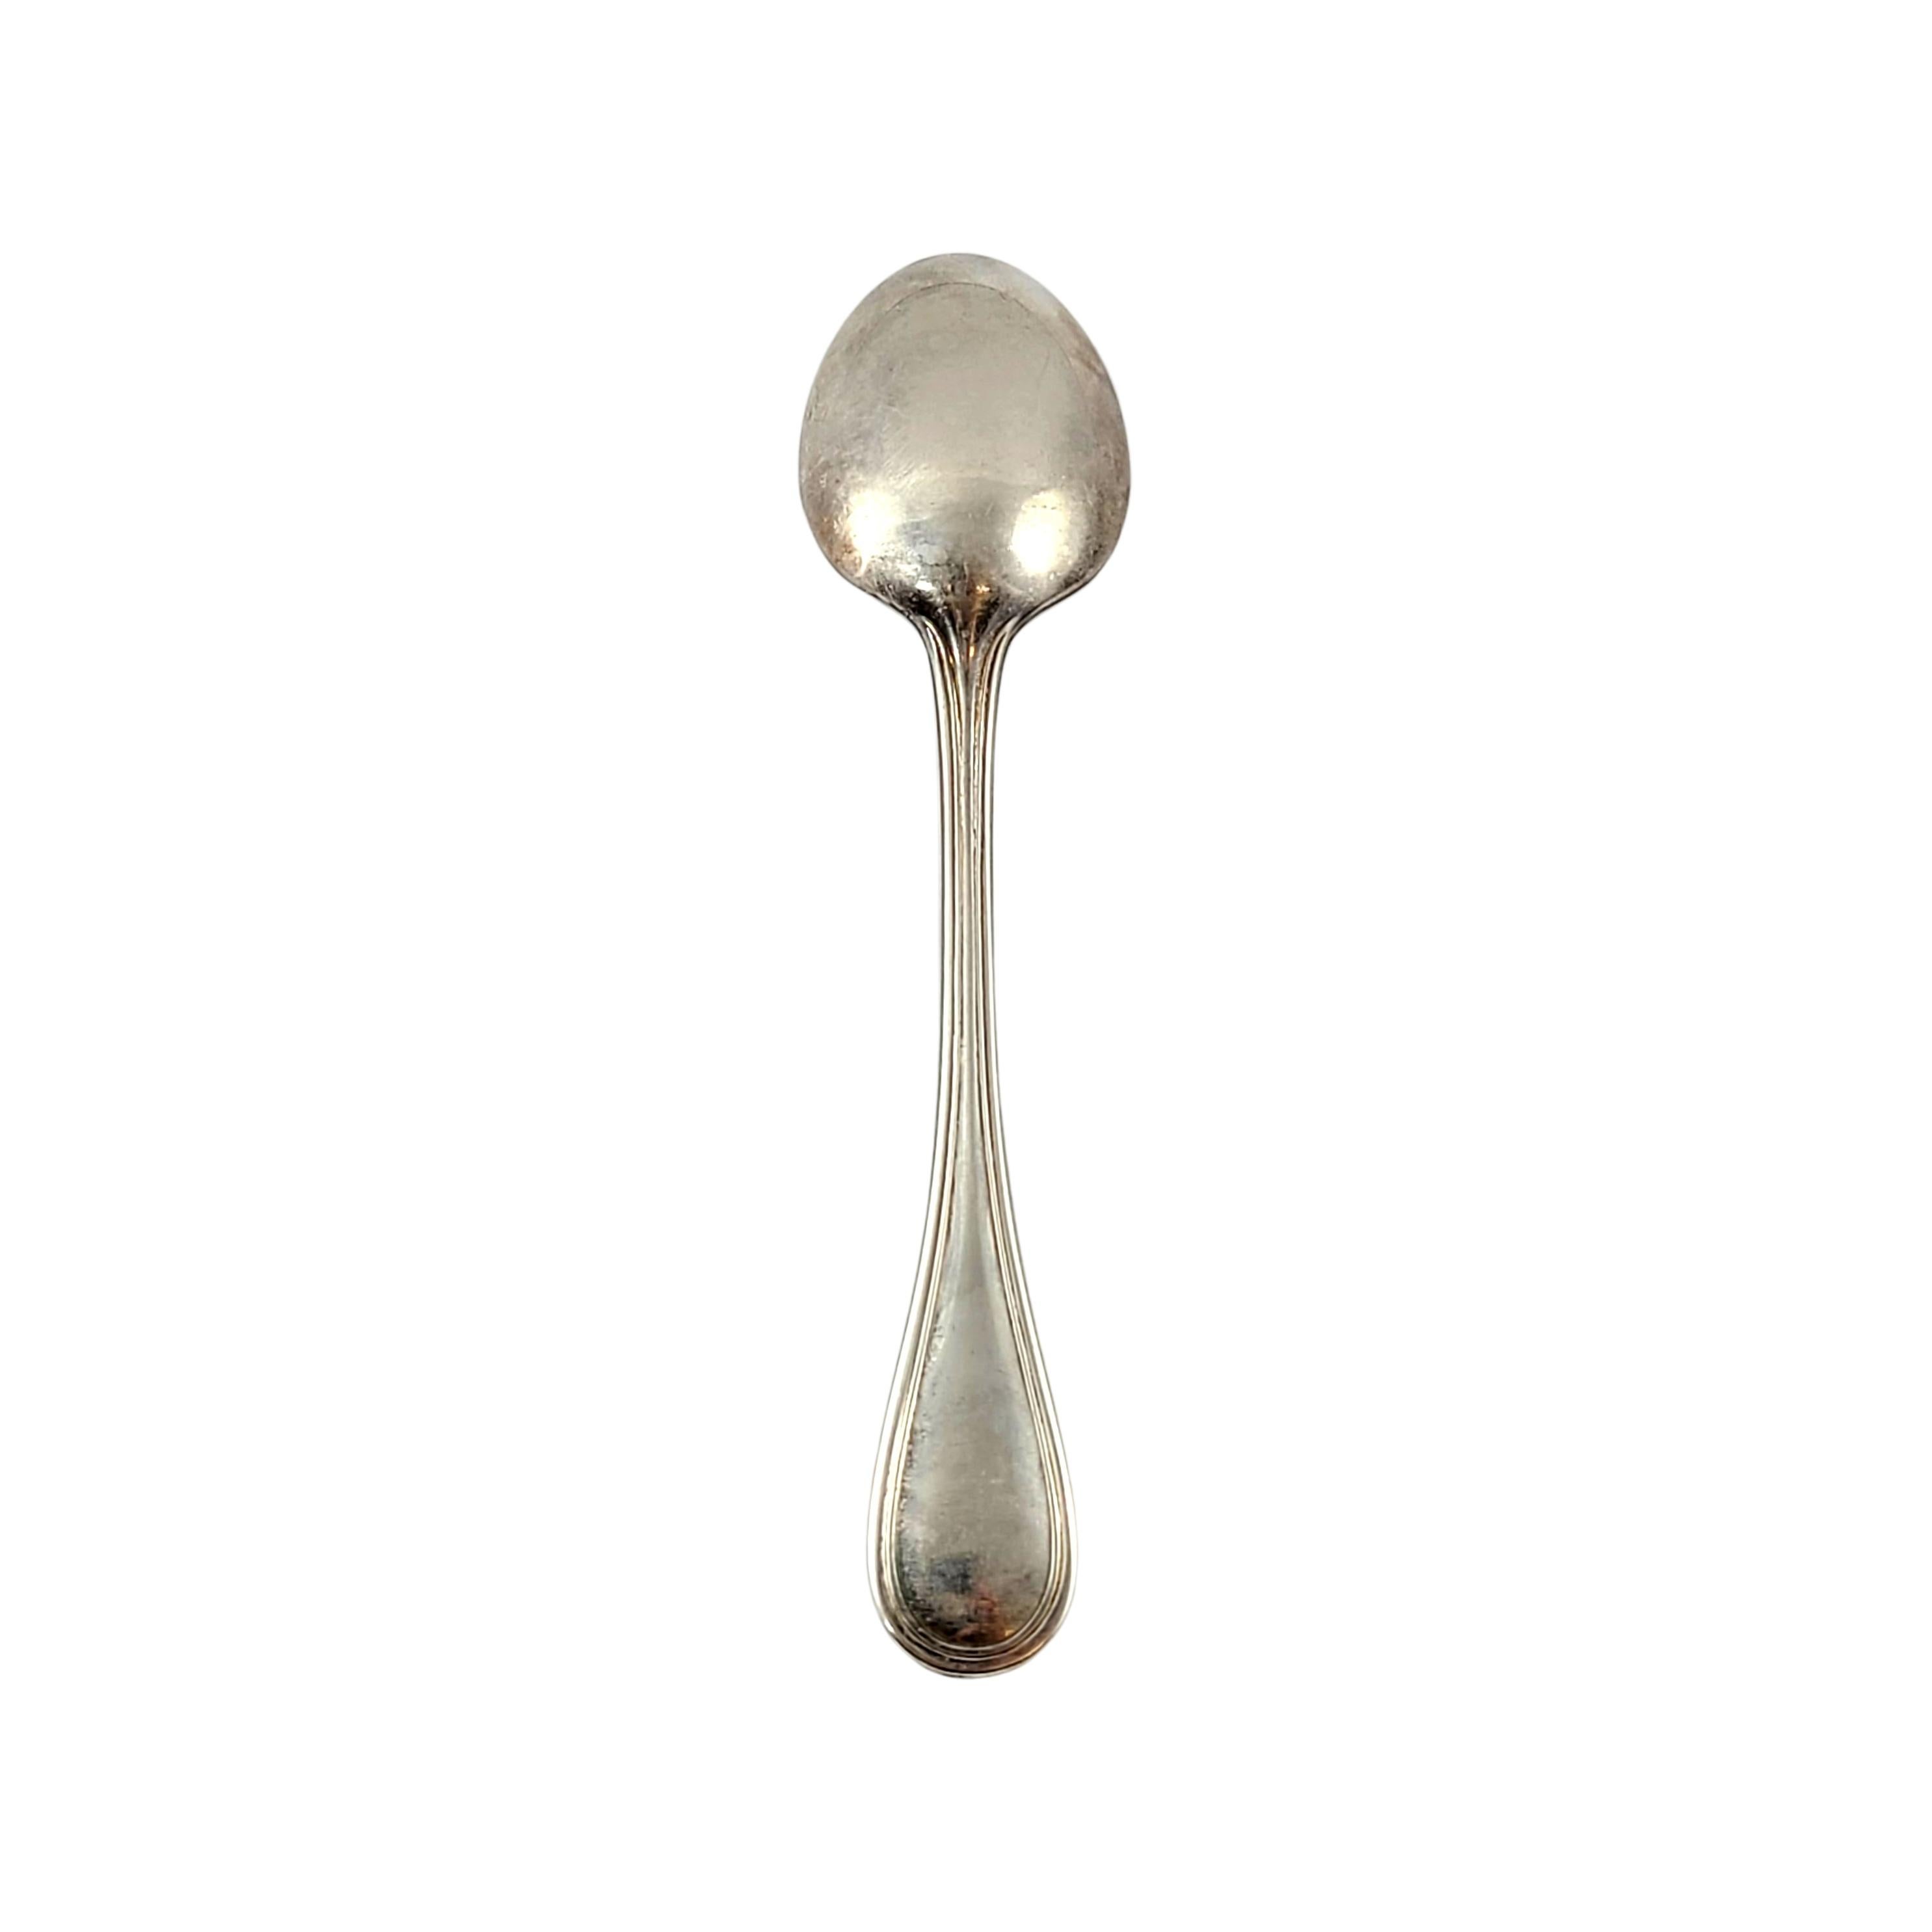 Silver plated medicine spoon/invalid feeder in the Albi pattern by Christofle.

A unique piece in a simple and elegant pattern.

Measures 5 1/4